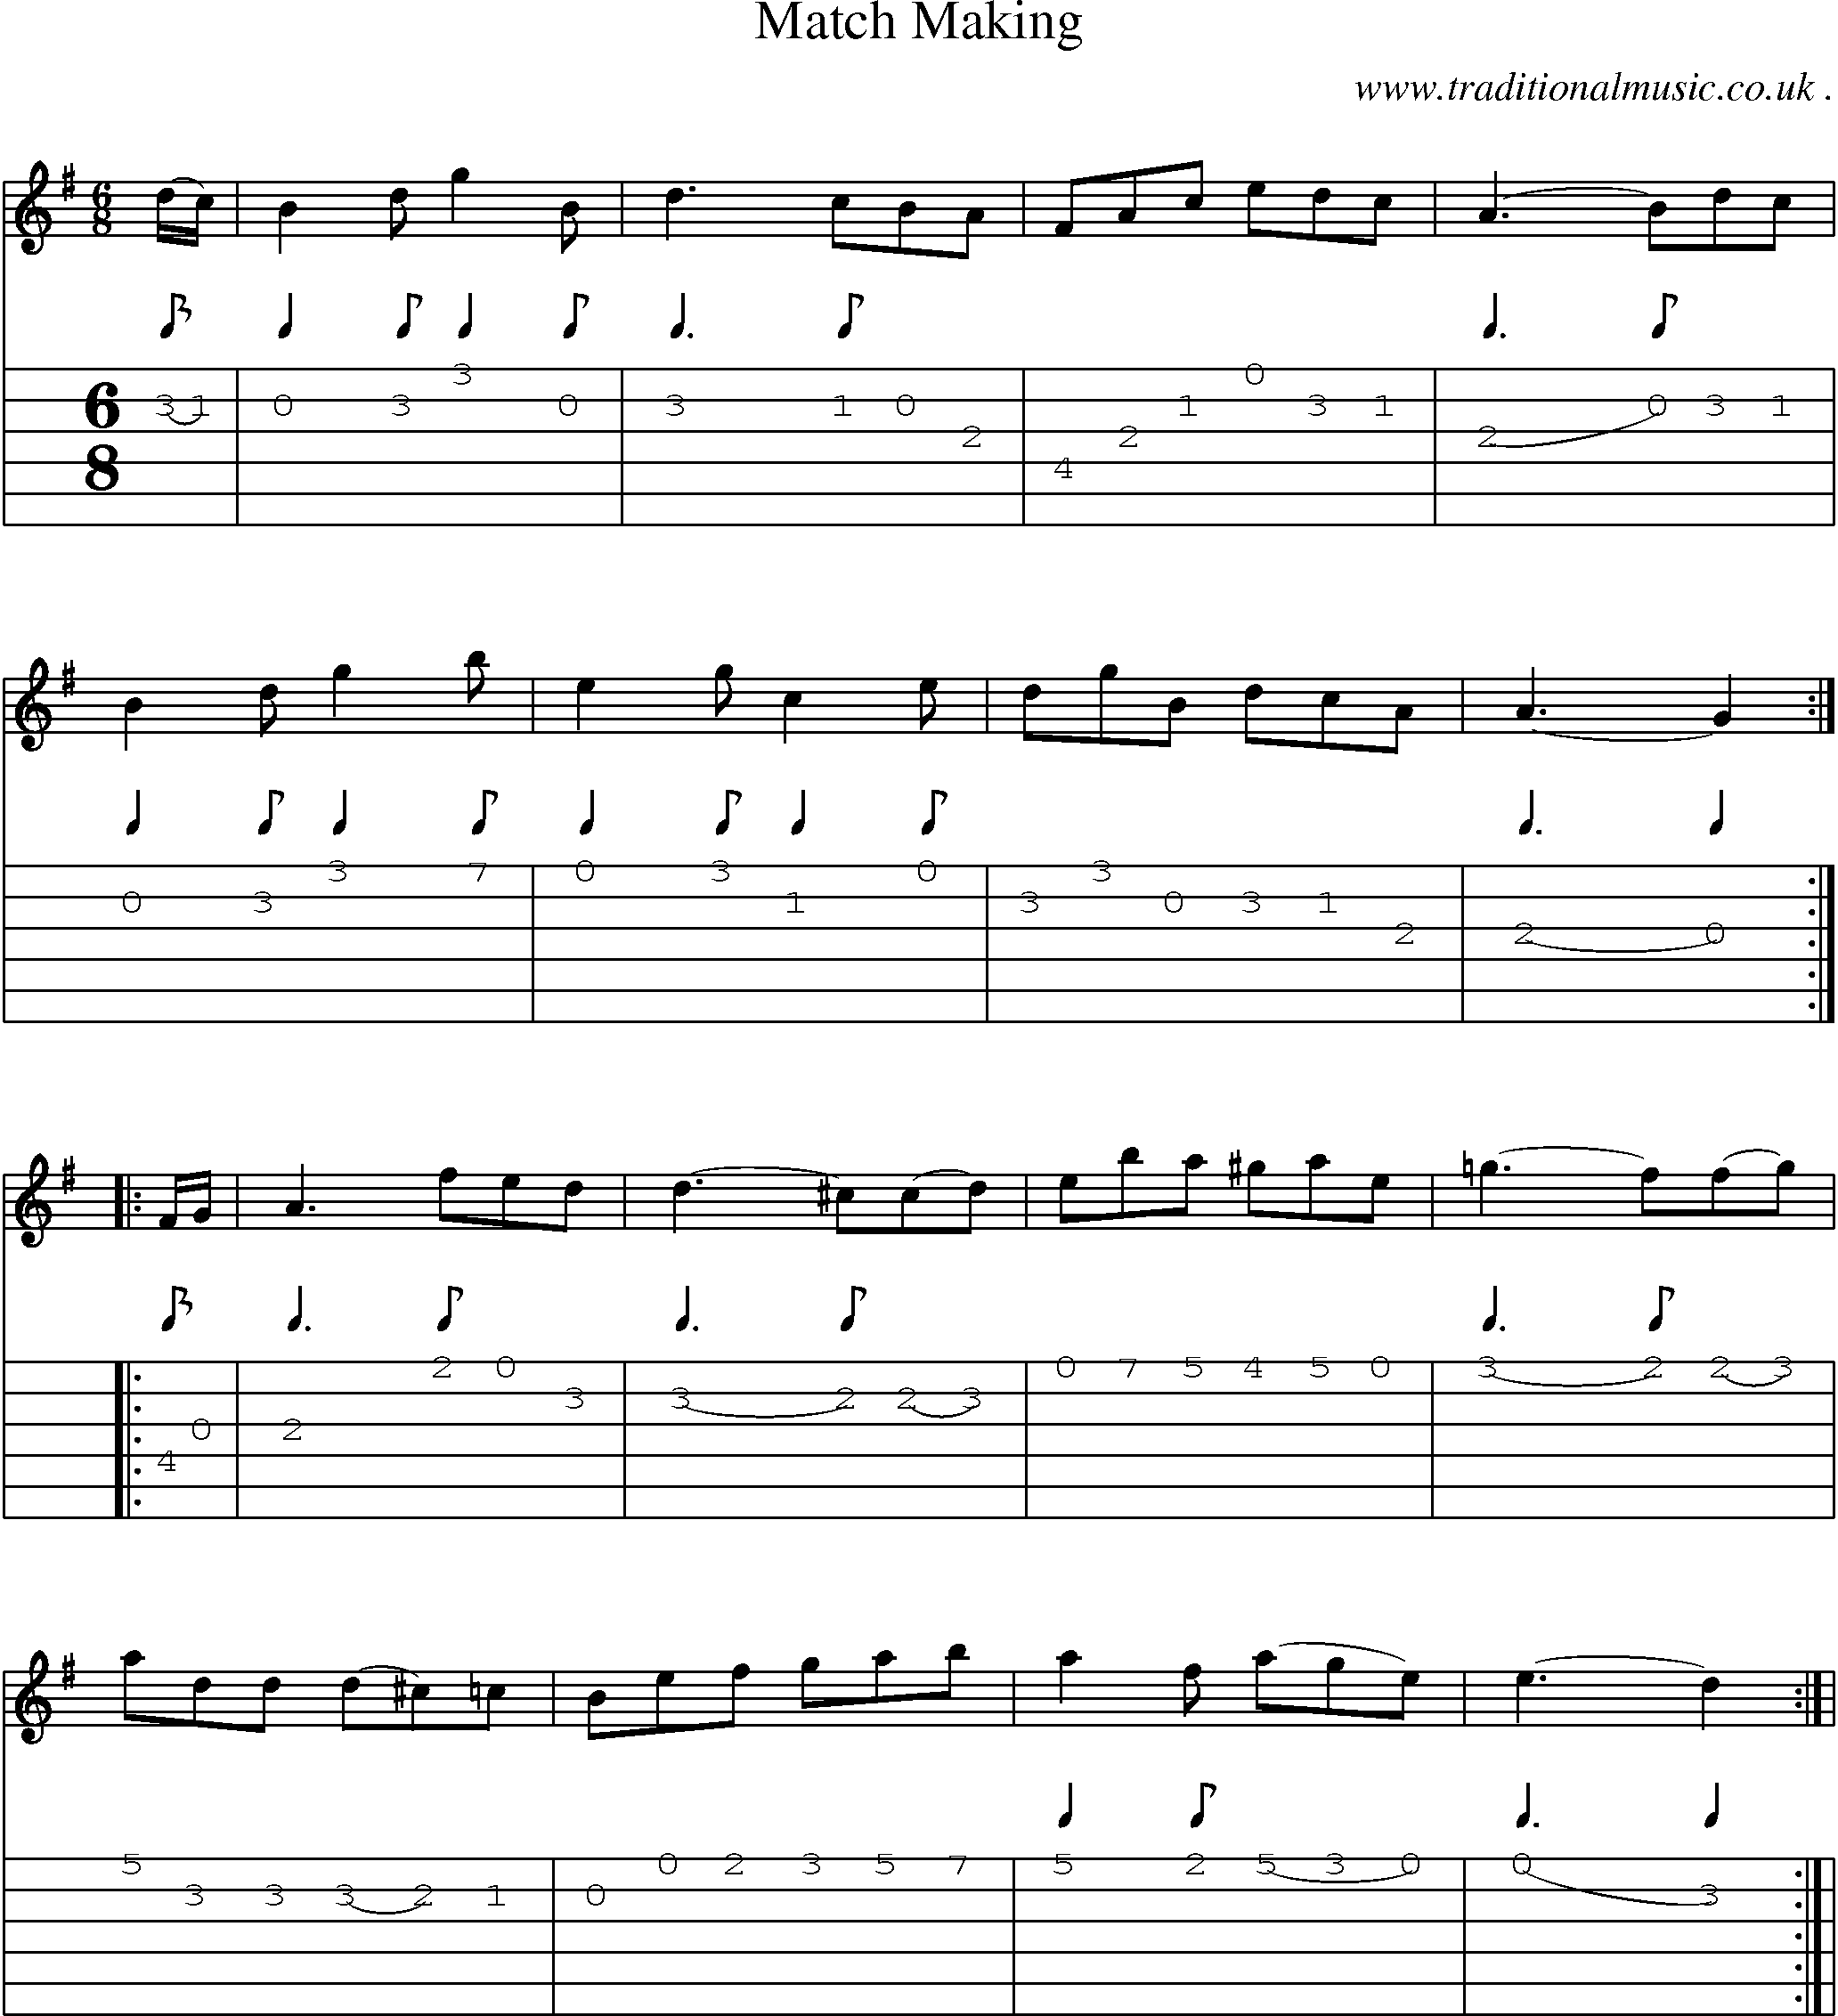 Sheet-Music and Guitar Tabs for Match Making